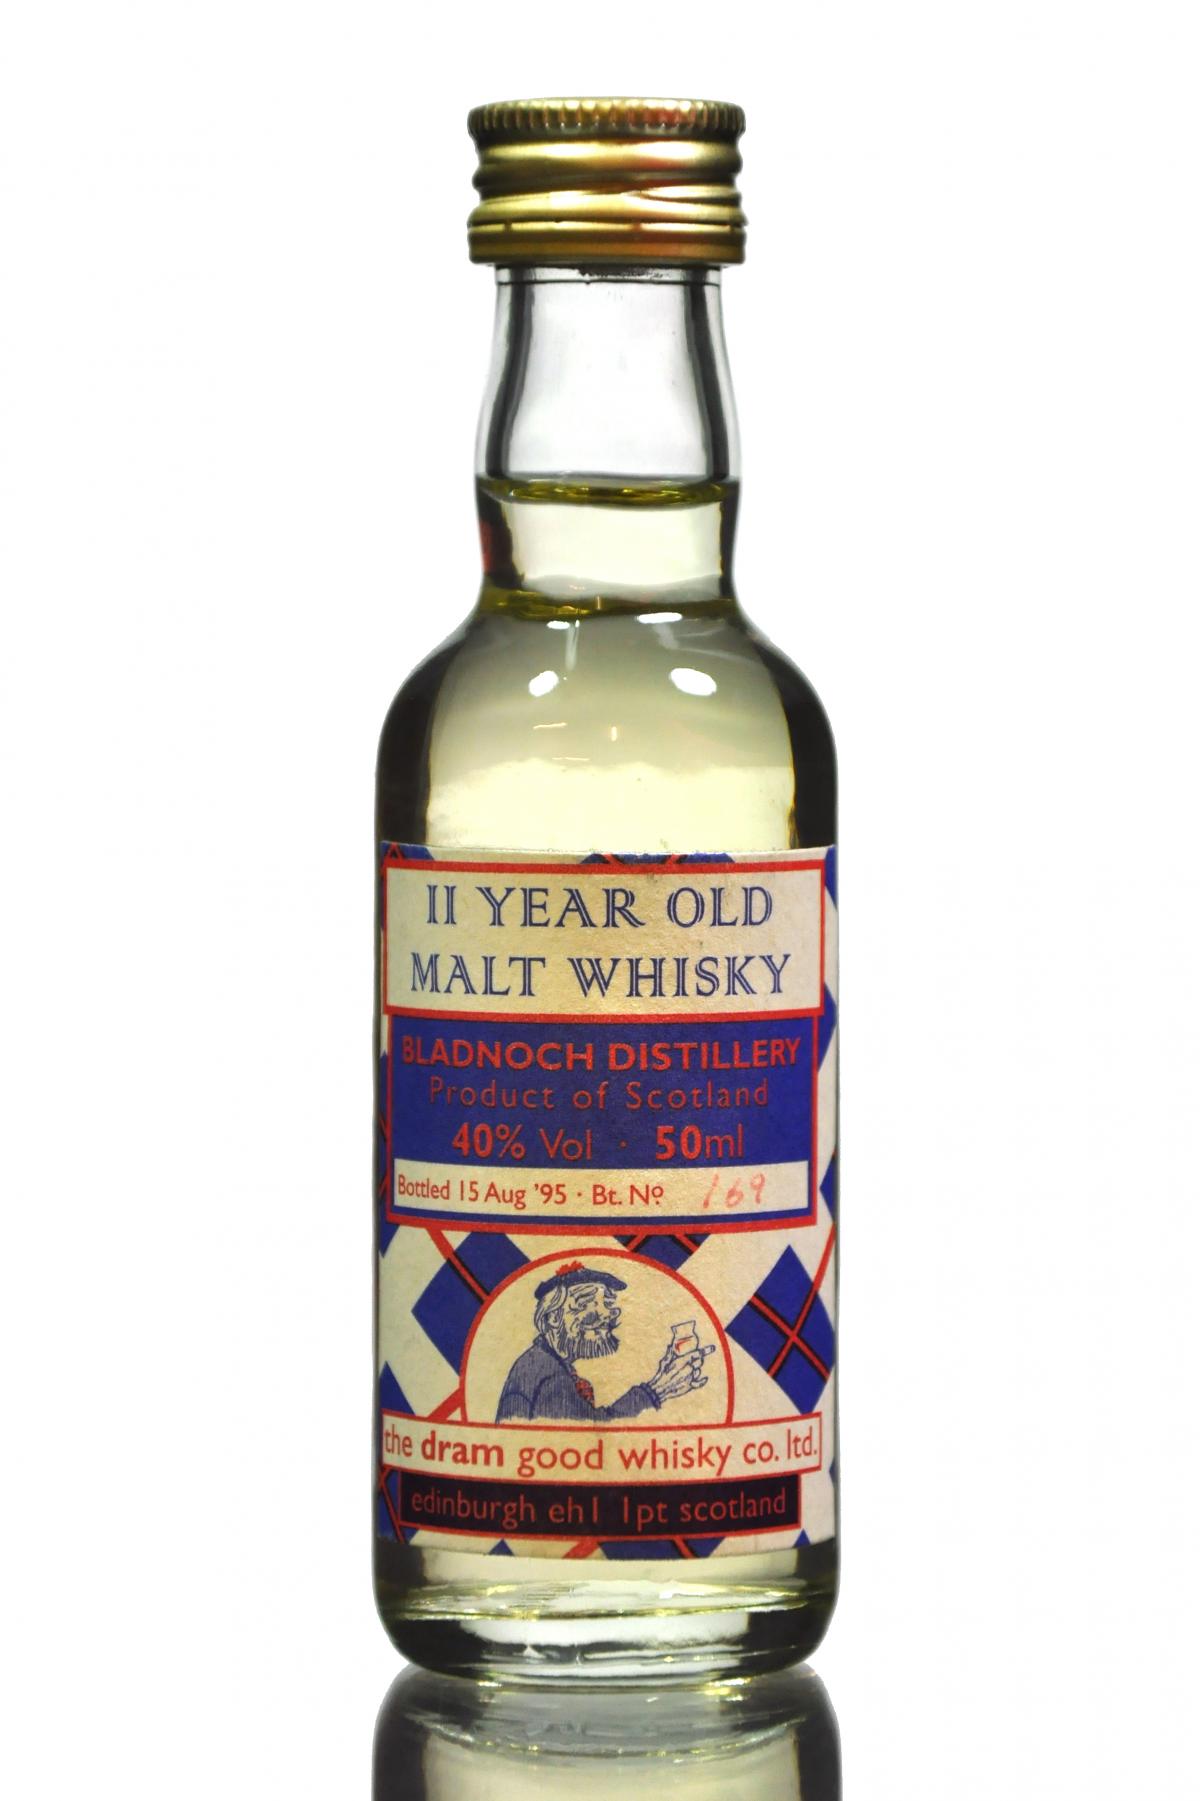 Bladnoch 11 Year Old - The Dram Good Whisky Co - 1995 Release - Miniature